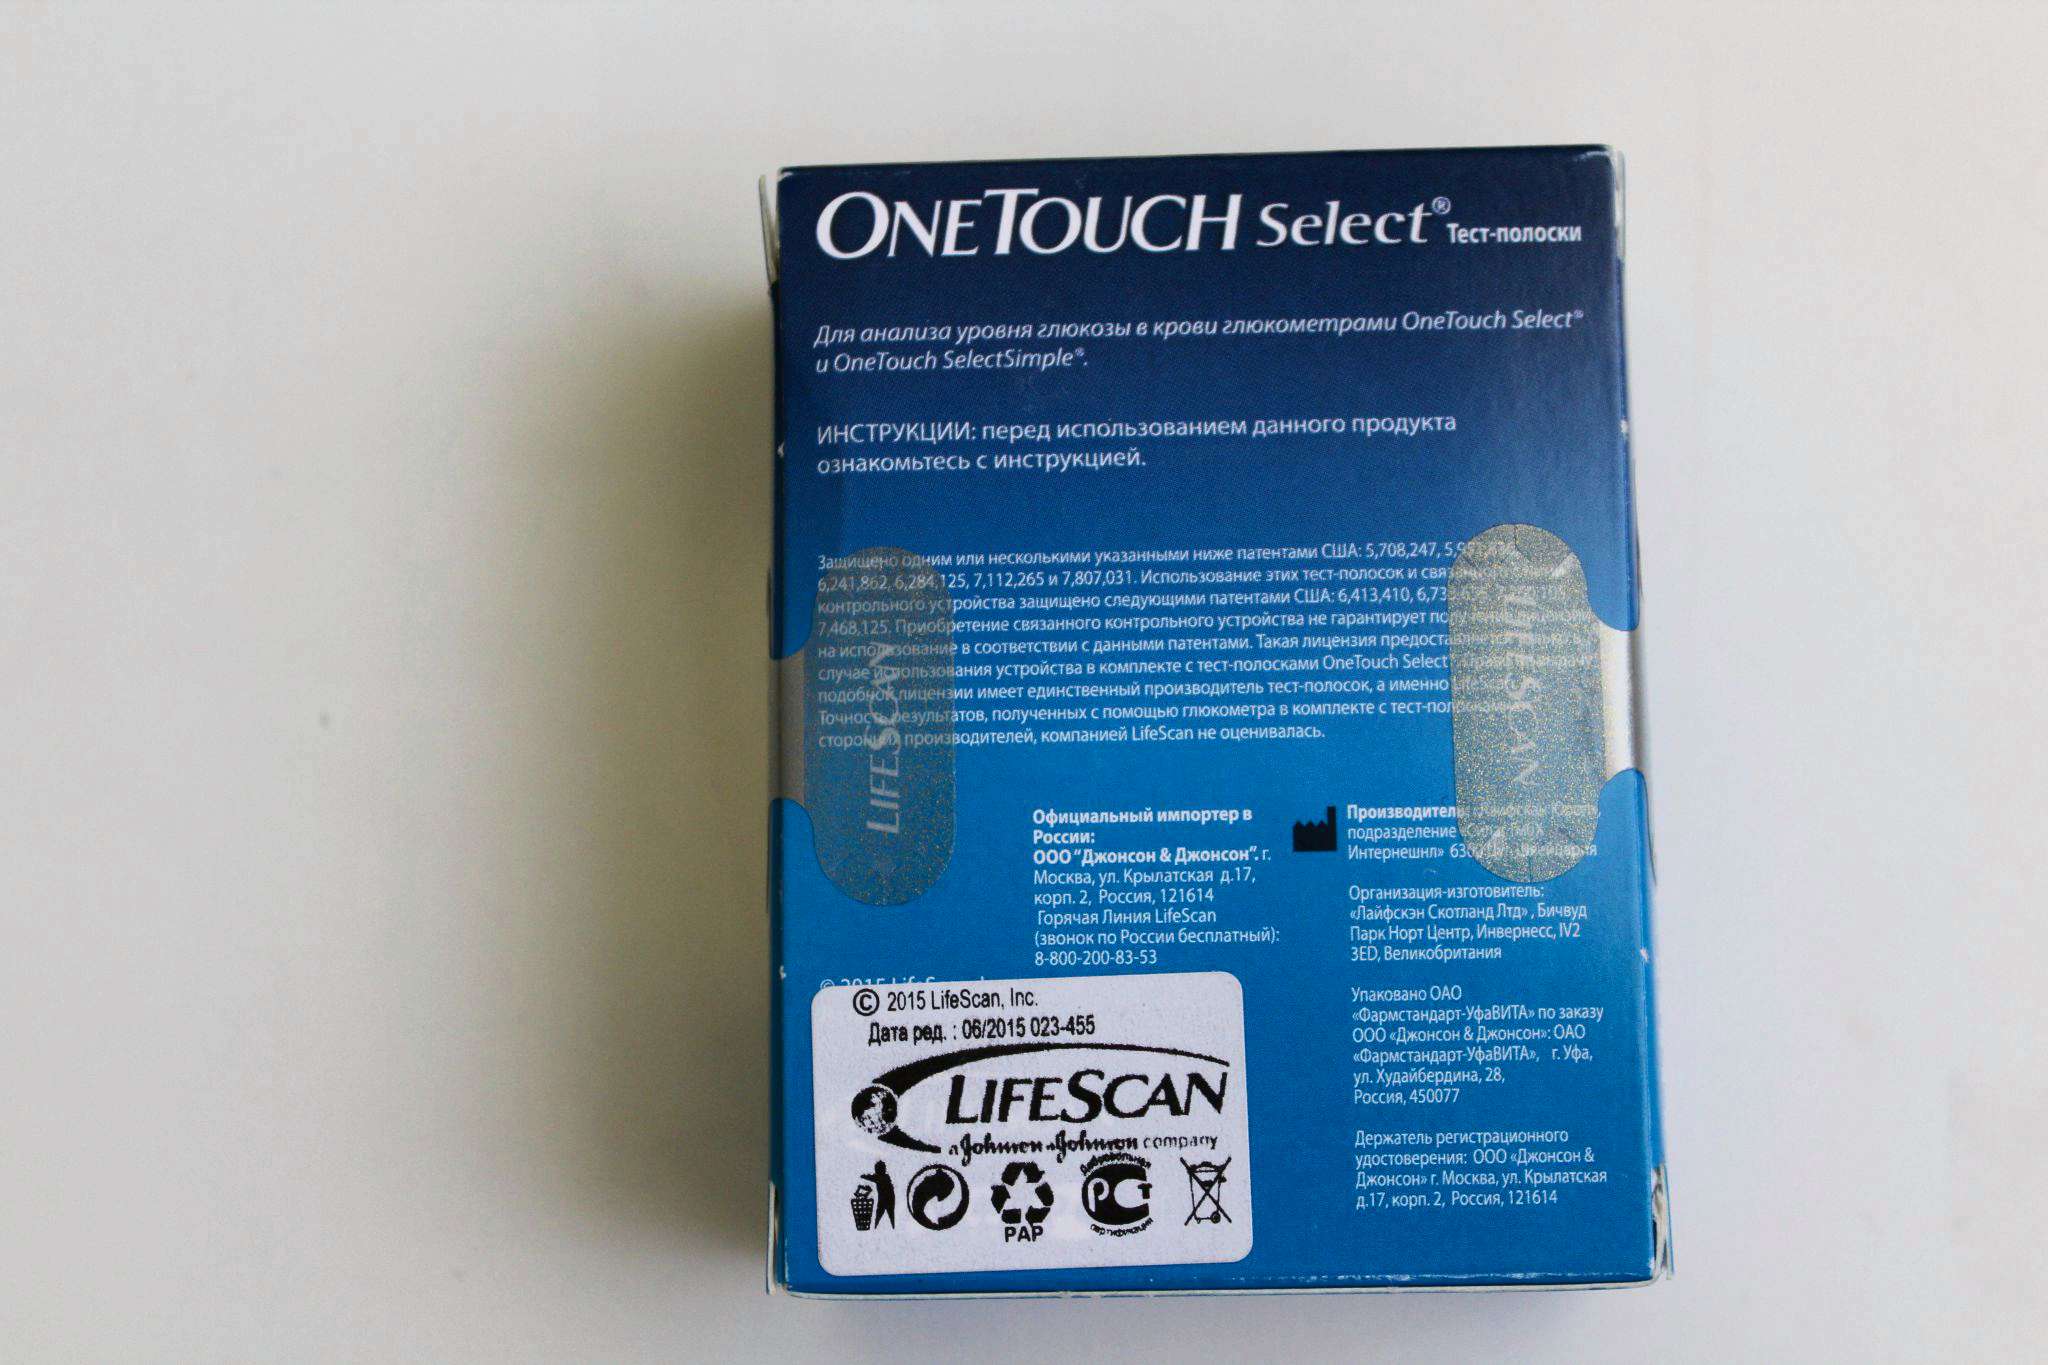 One touch select 100 тест полосок. ONETOUCH select тест полоски. Тест-полоски littest-11g (№ 100). Тест-полоски ONETOUCH select Plus 100 шт.